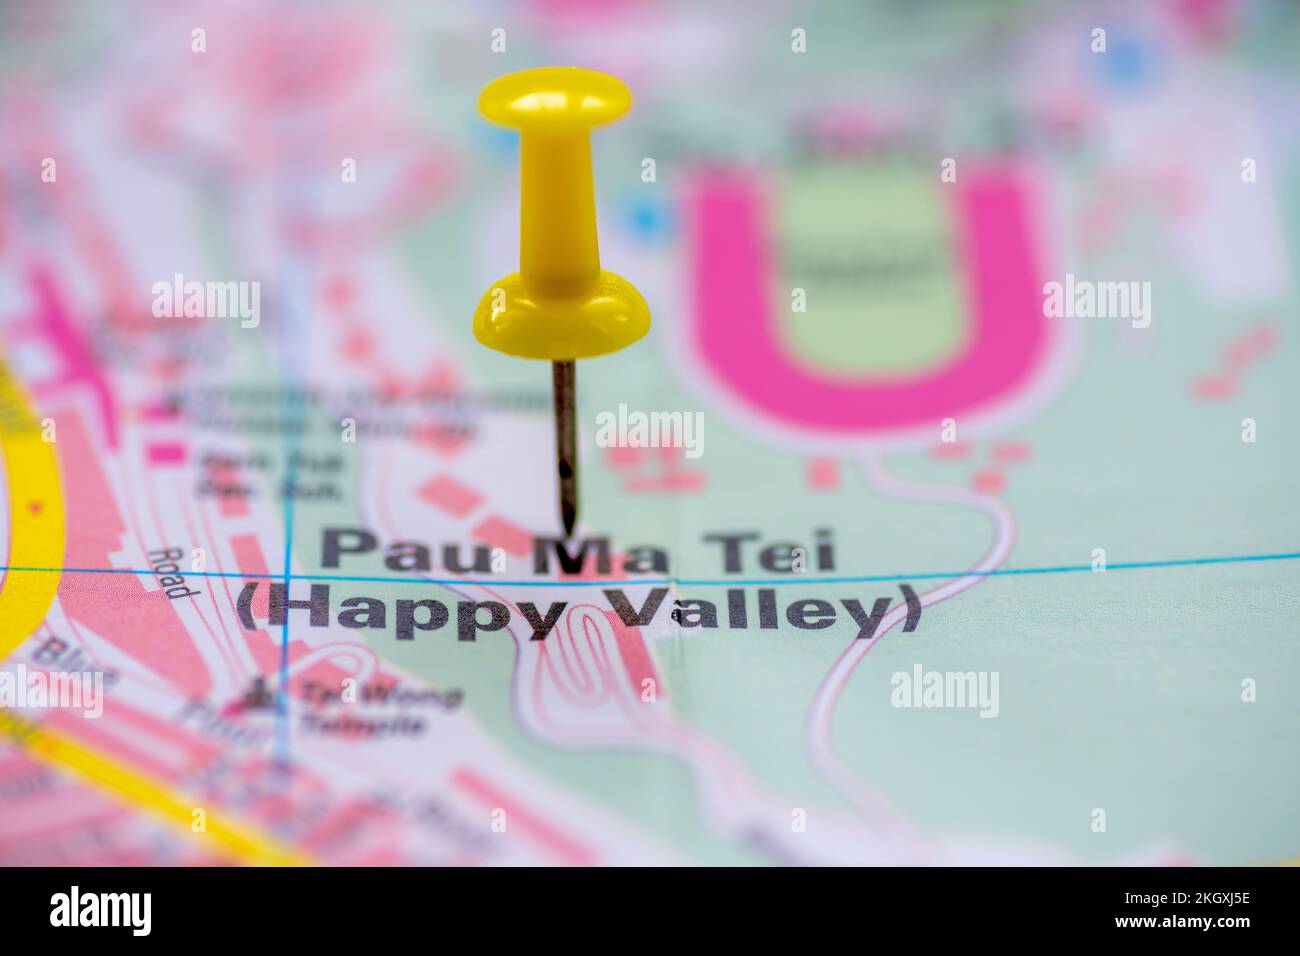 The map location of Happy Valley on Hong Kong island, China, marked by a yellow pushpin. Stock Photo